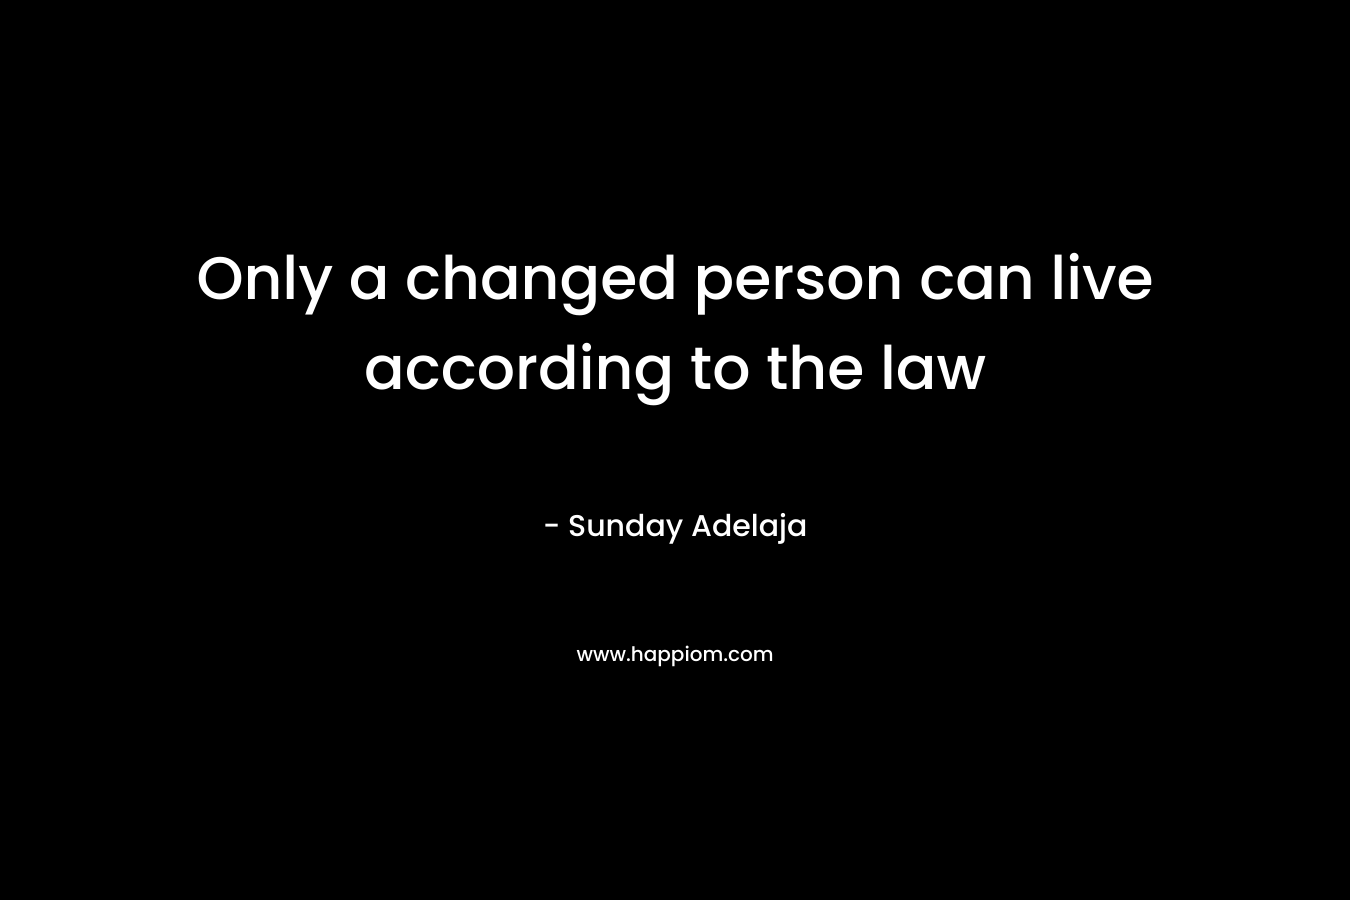 Only a changed person can live according to the law